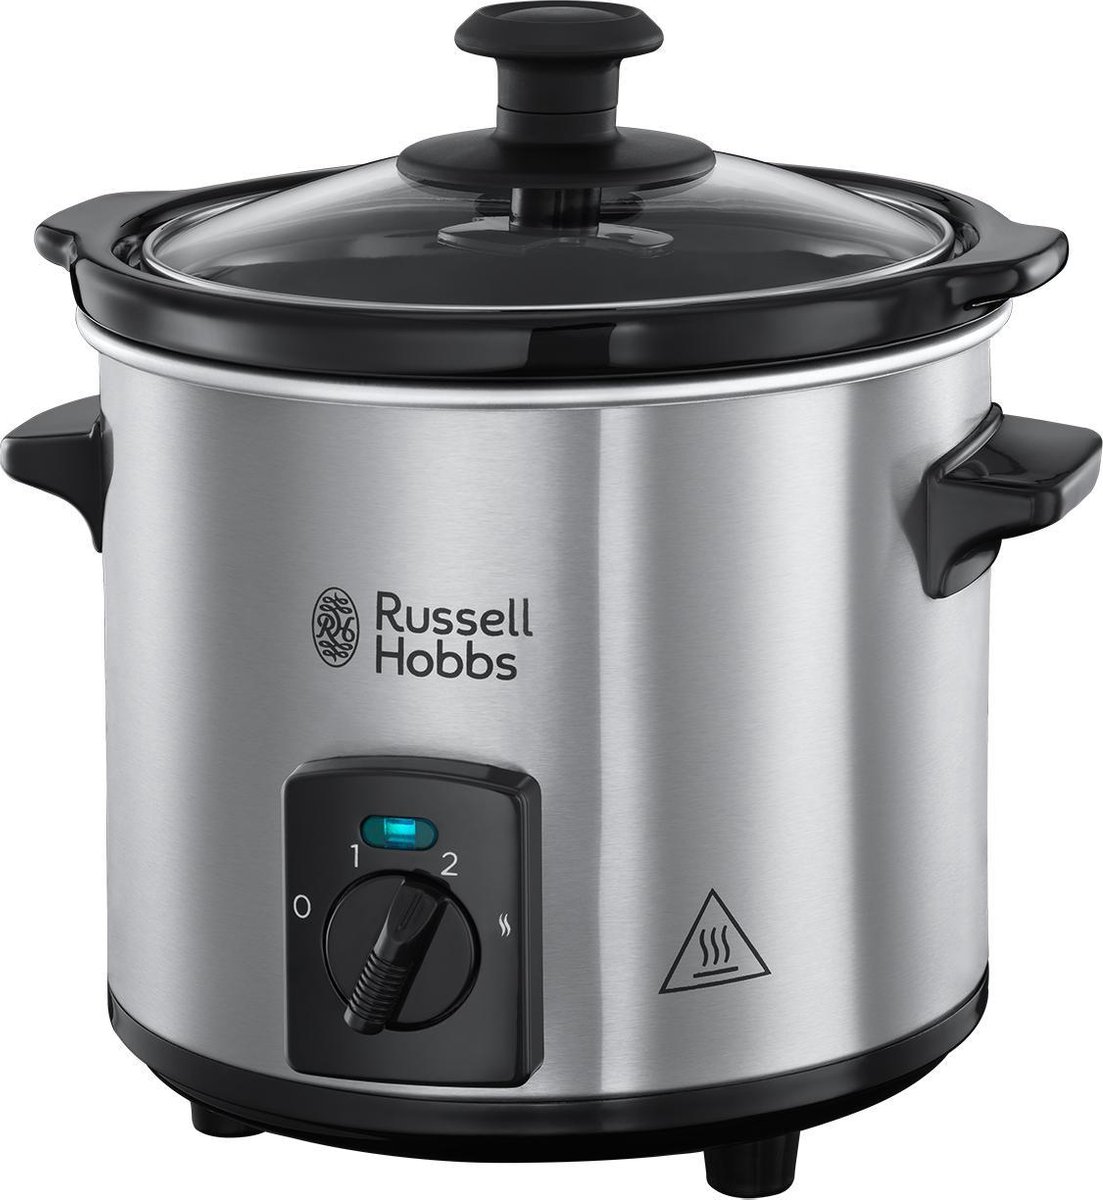 Russell Hobbs 25570-56 Compact Home 2L Slowcooker review